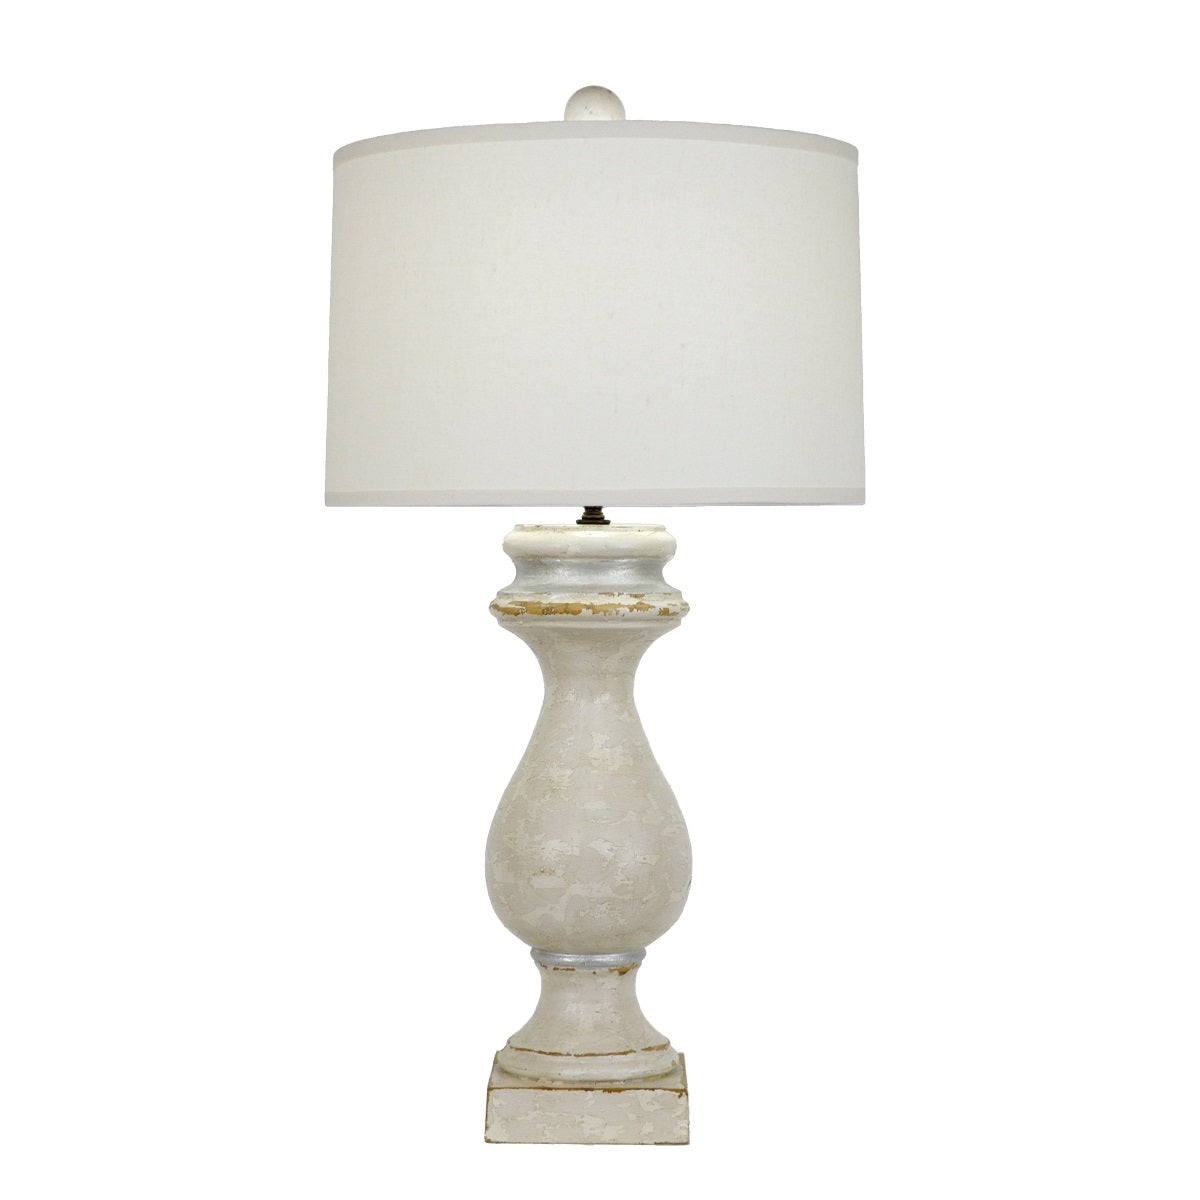 Atticus Solid Wood Table Lamp - Lillian Home 